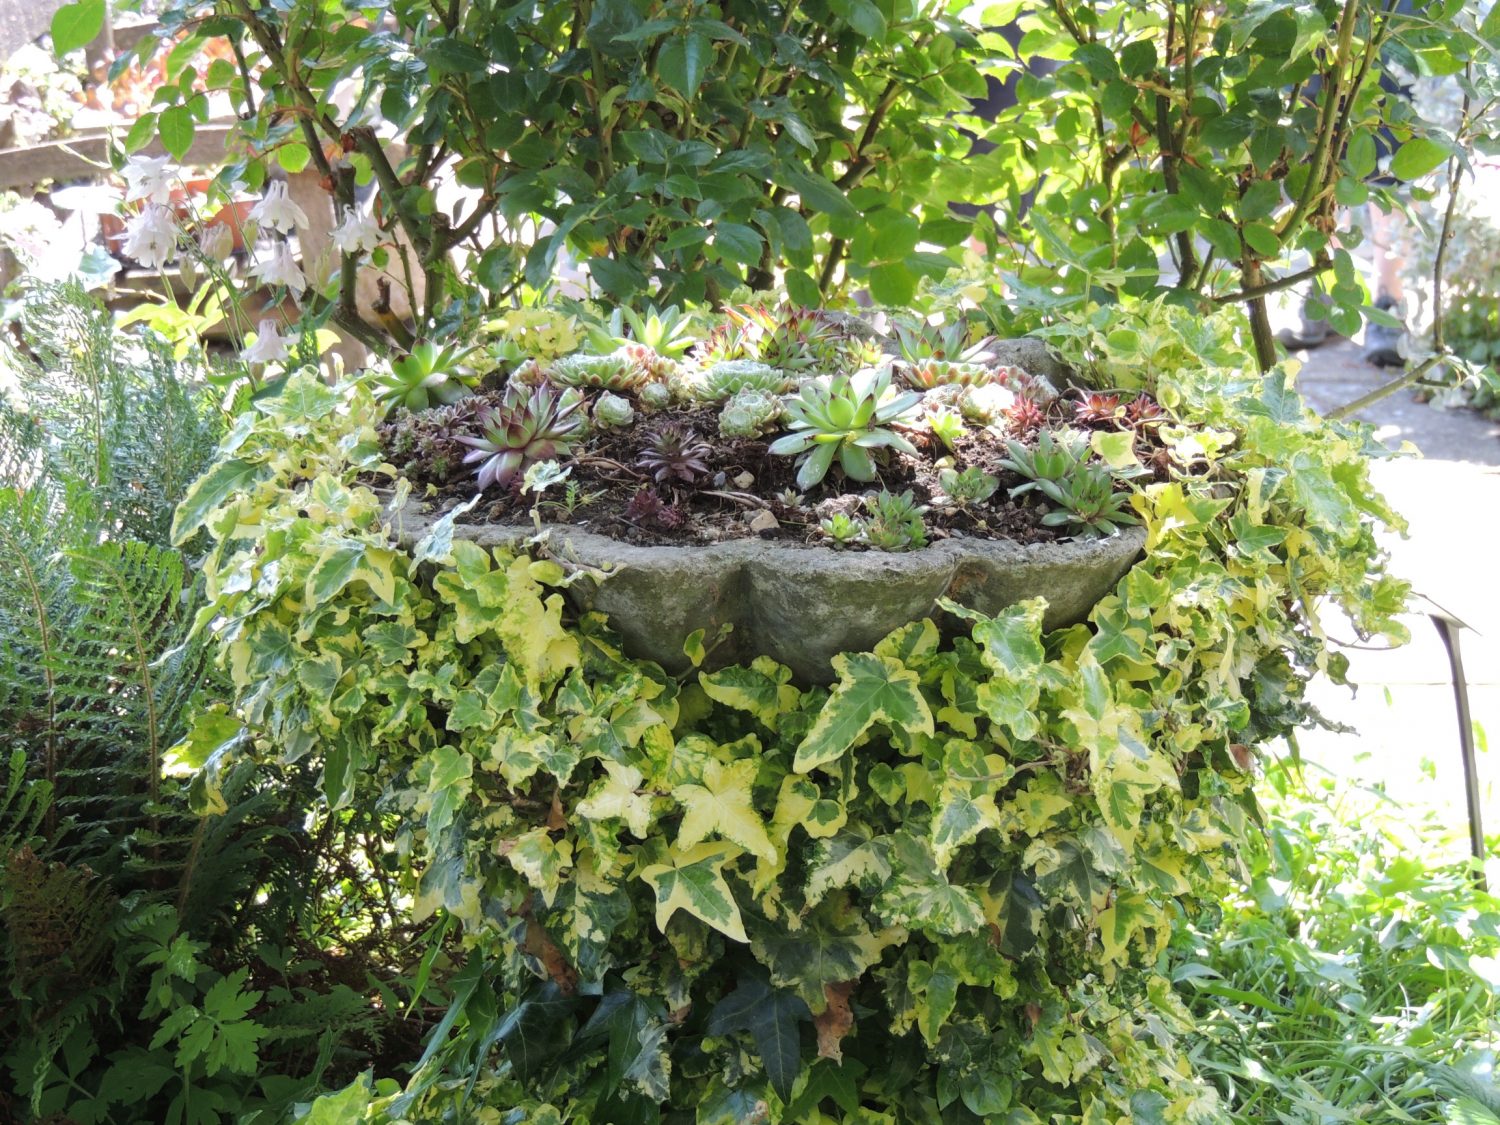 Variegated ivy snakes around a stone planter